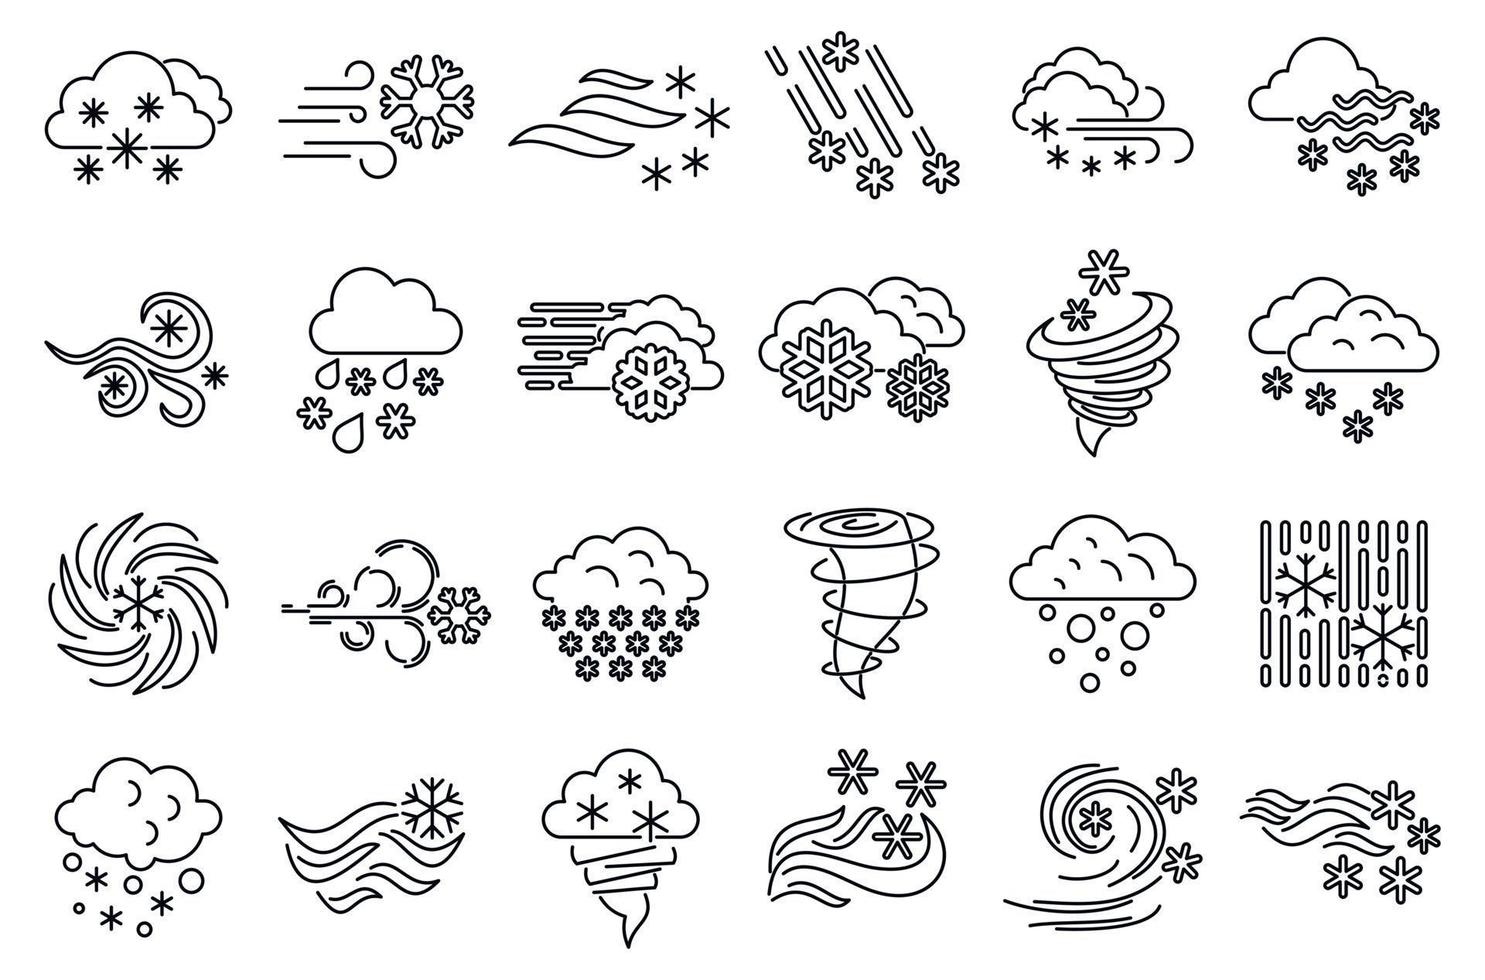 Blizzard climate icons set, outline style vector